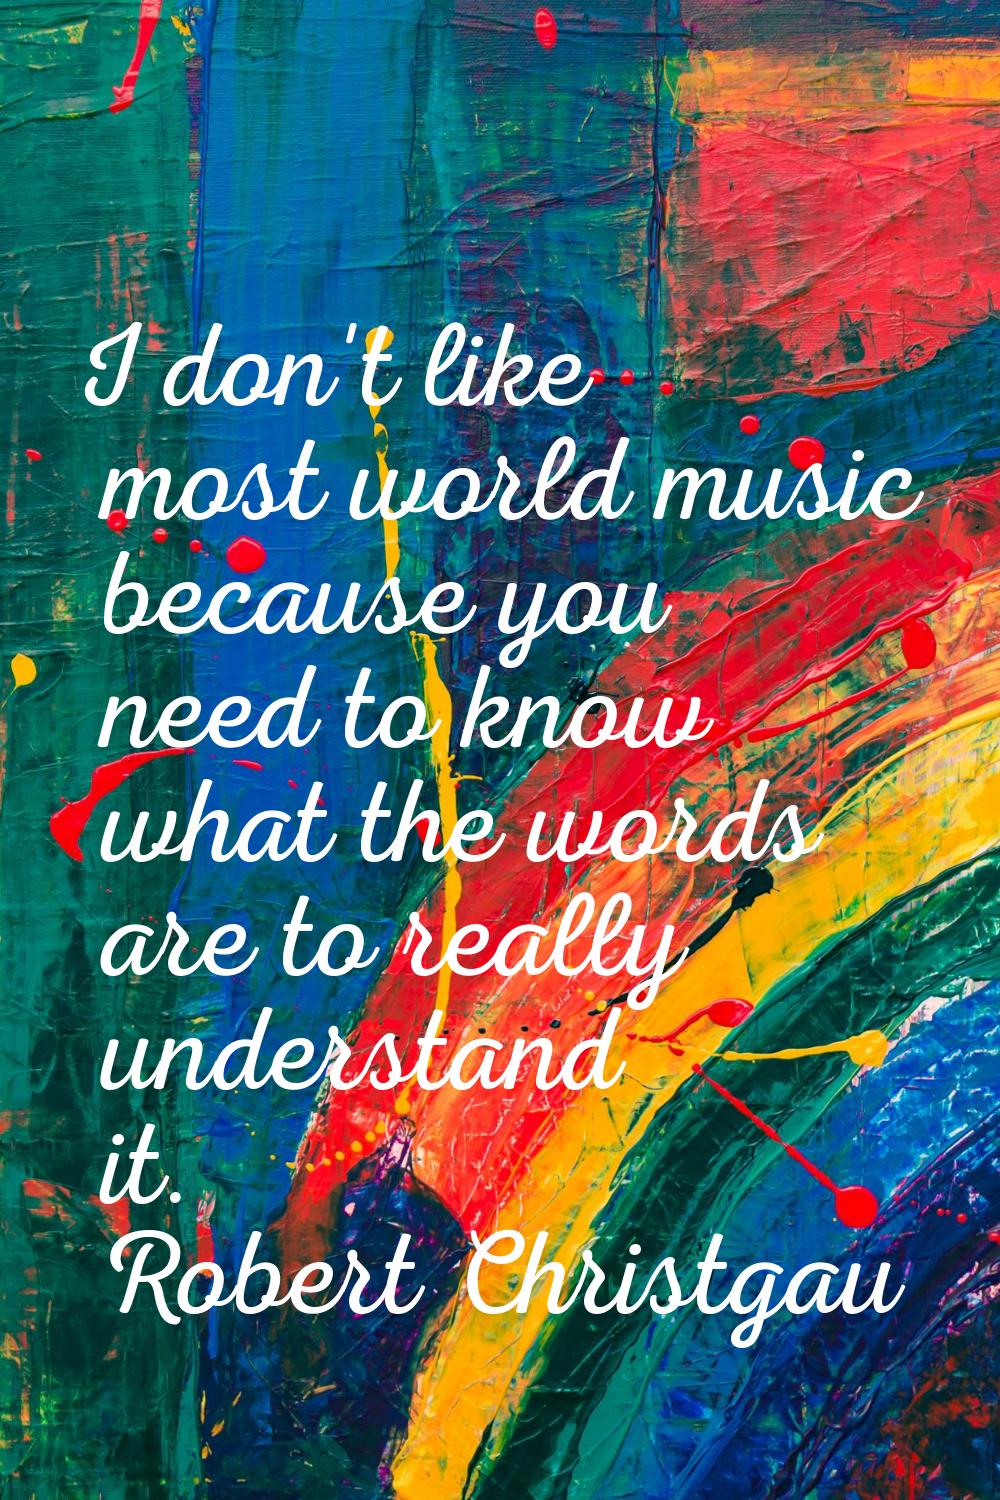 I don't like most world music because you need to know what the words are to really understand it.